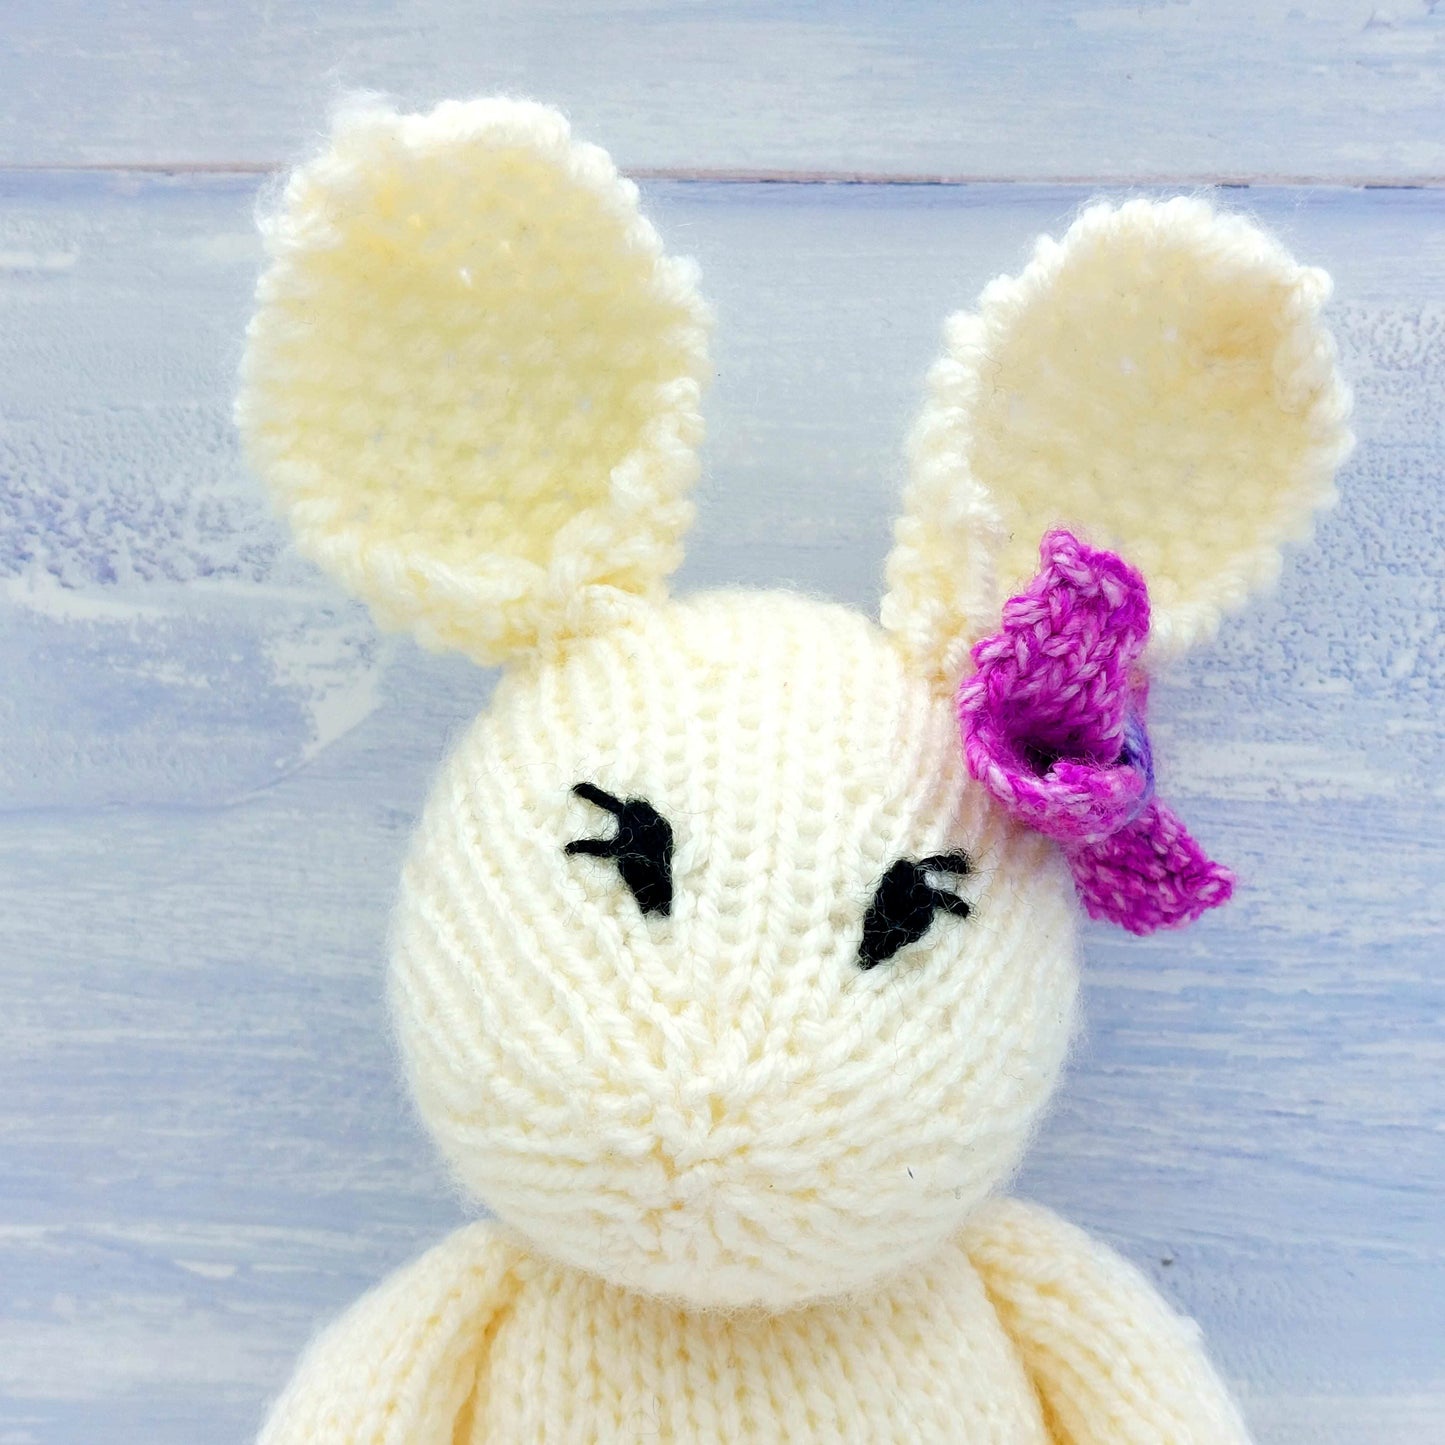 Close of head of knitted rabbit toy